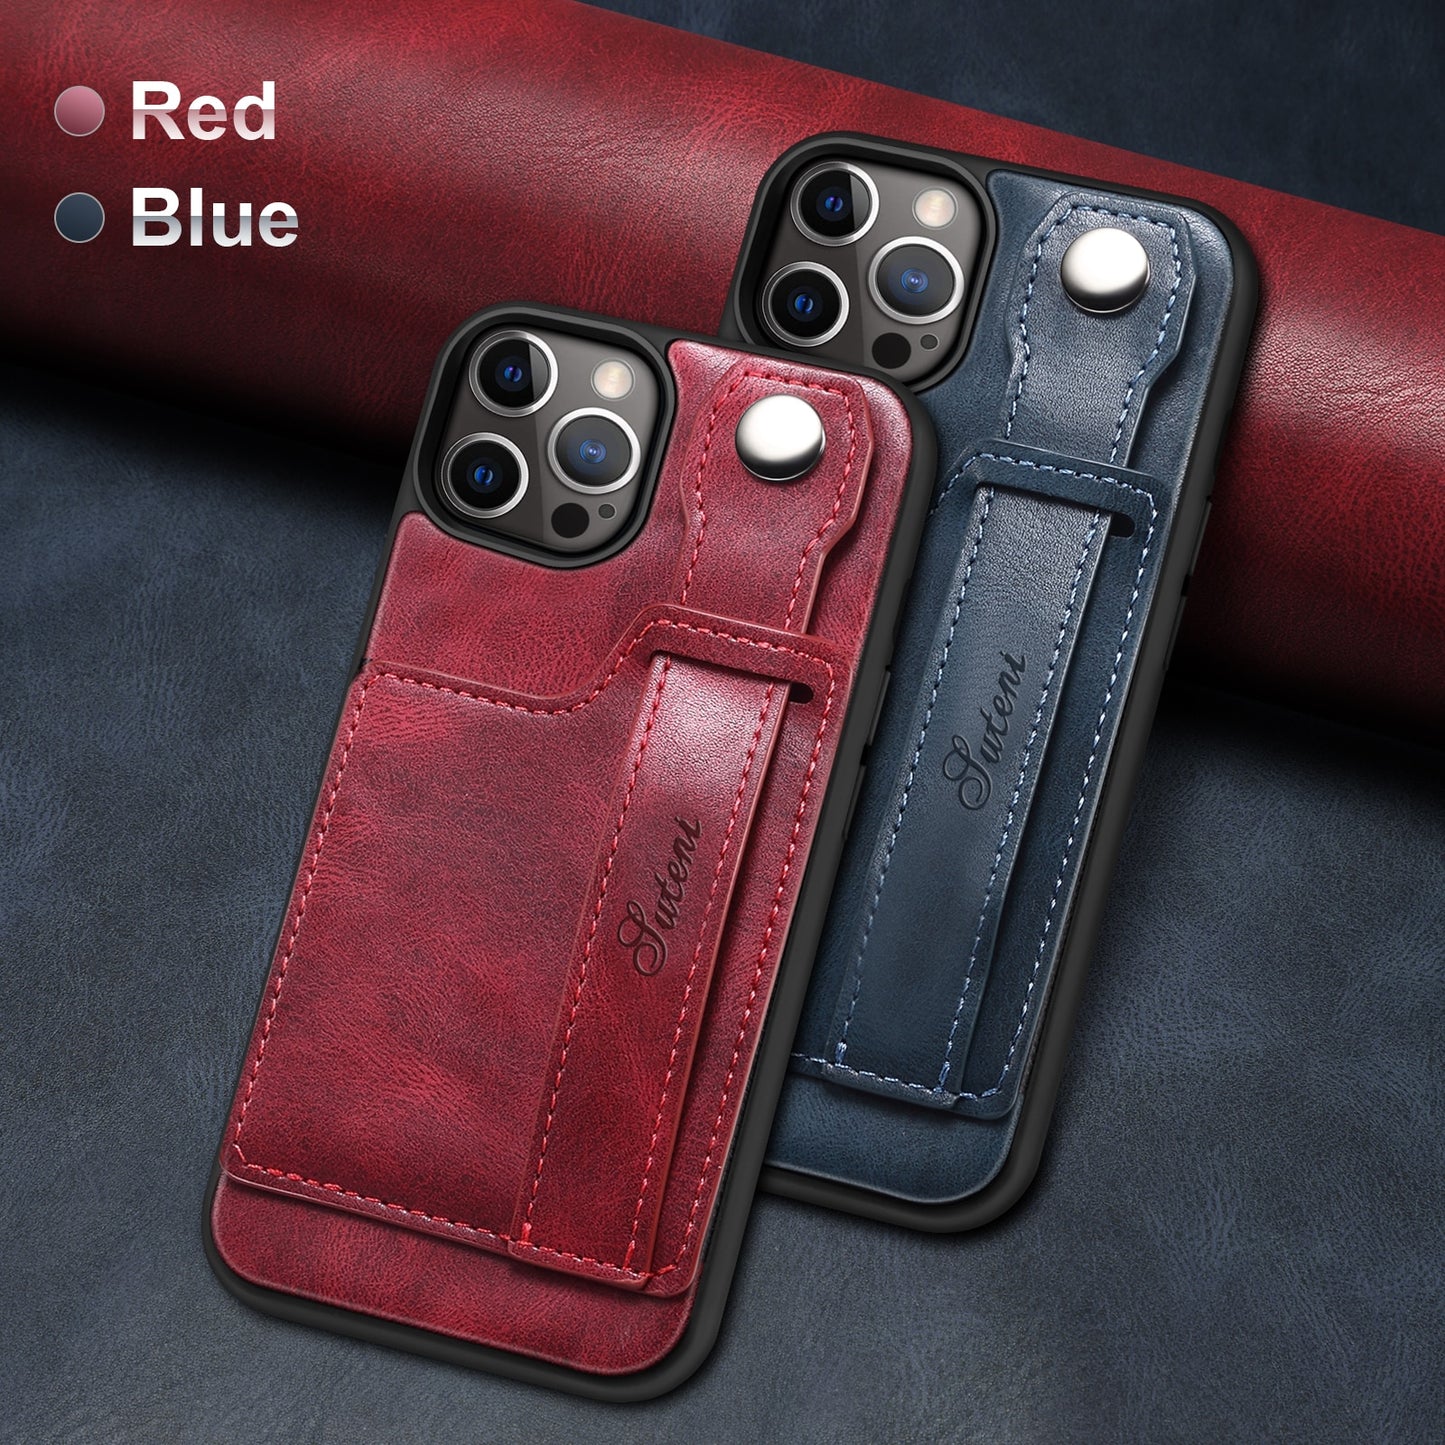 Luxury Case Leather Wallet Cover With Wrist Strap Stand Feature Credit Cards Pocket - sky-cover